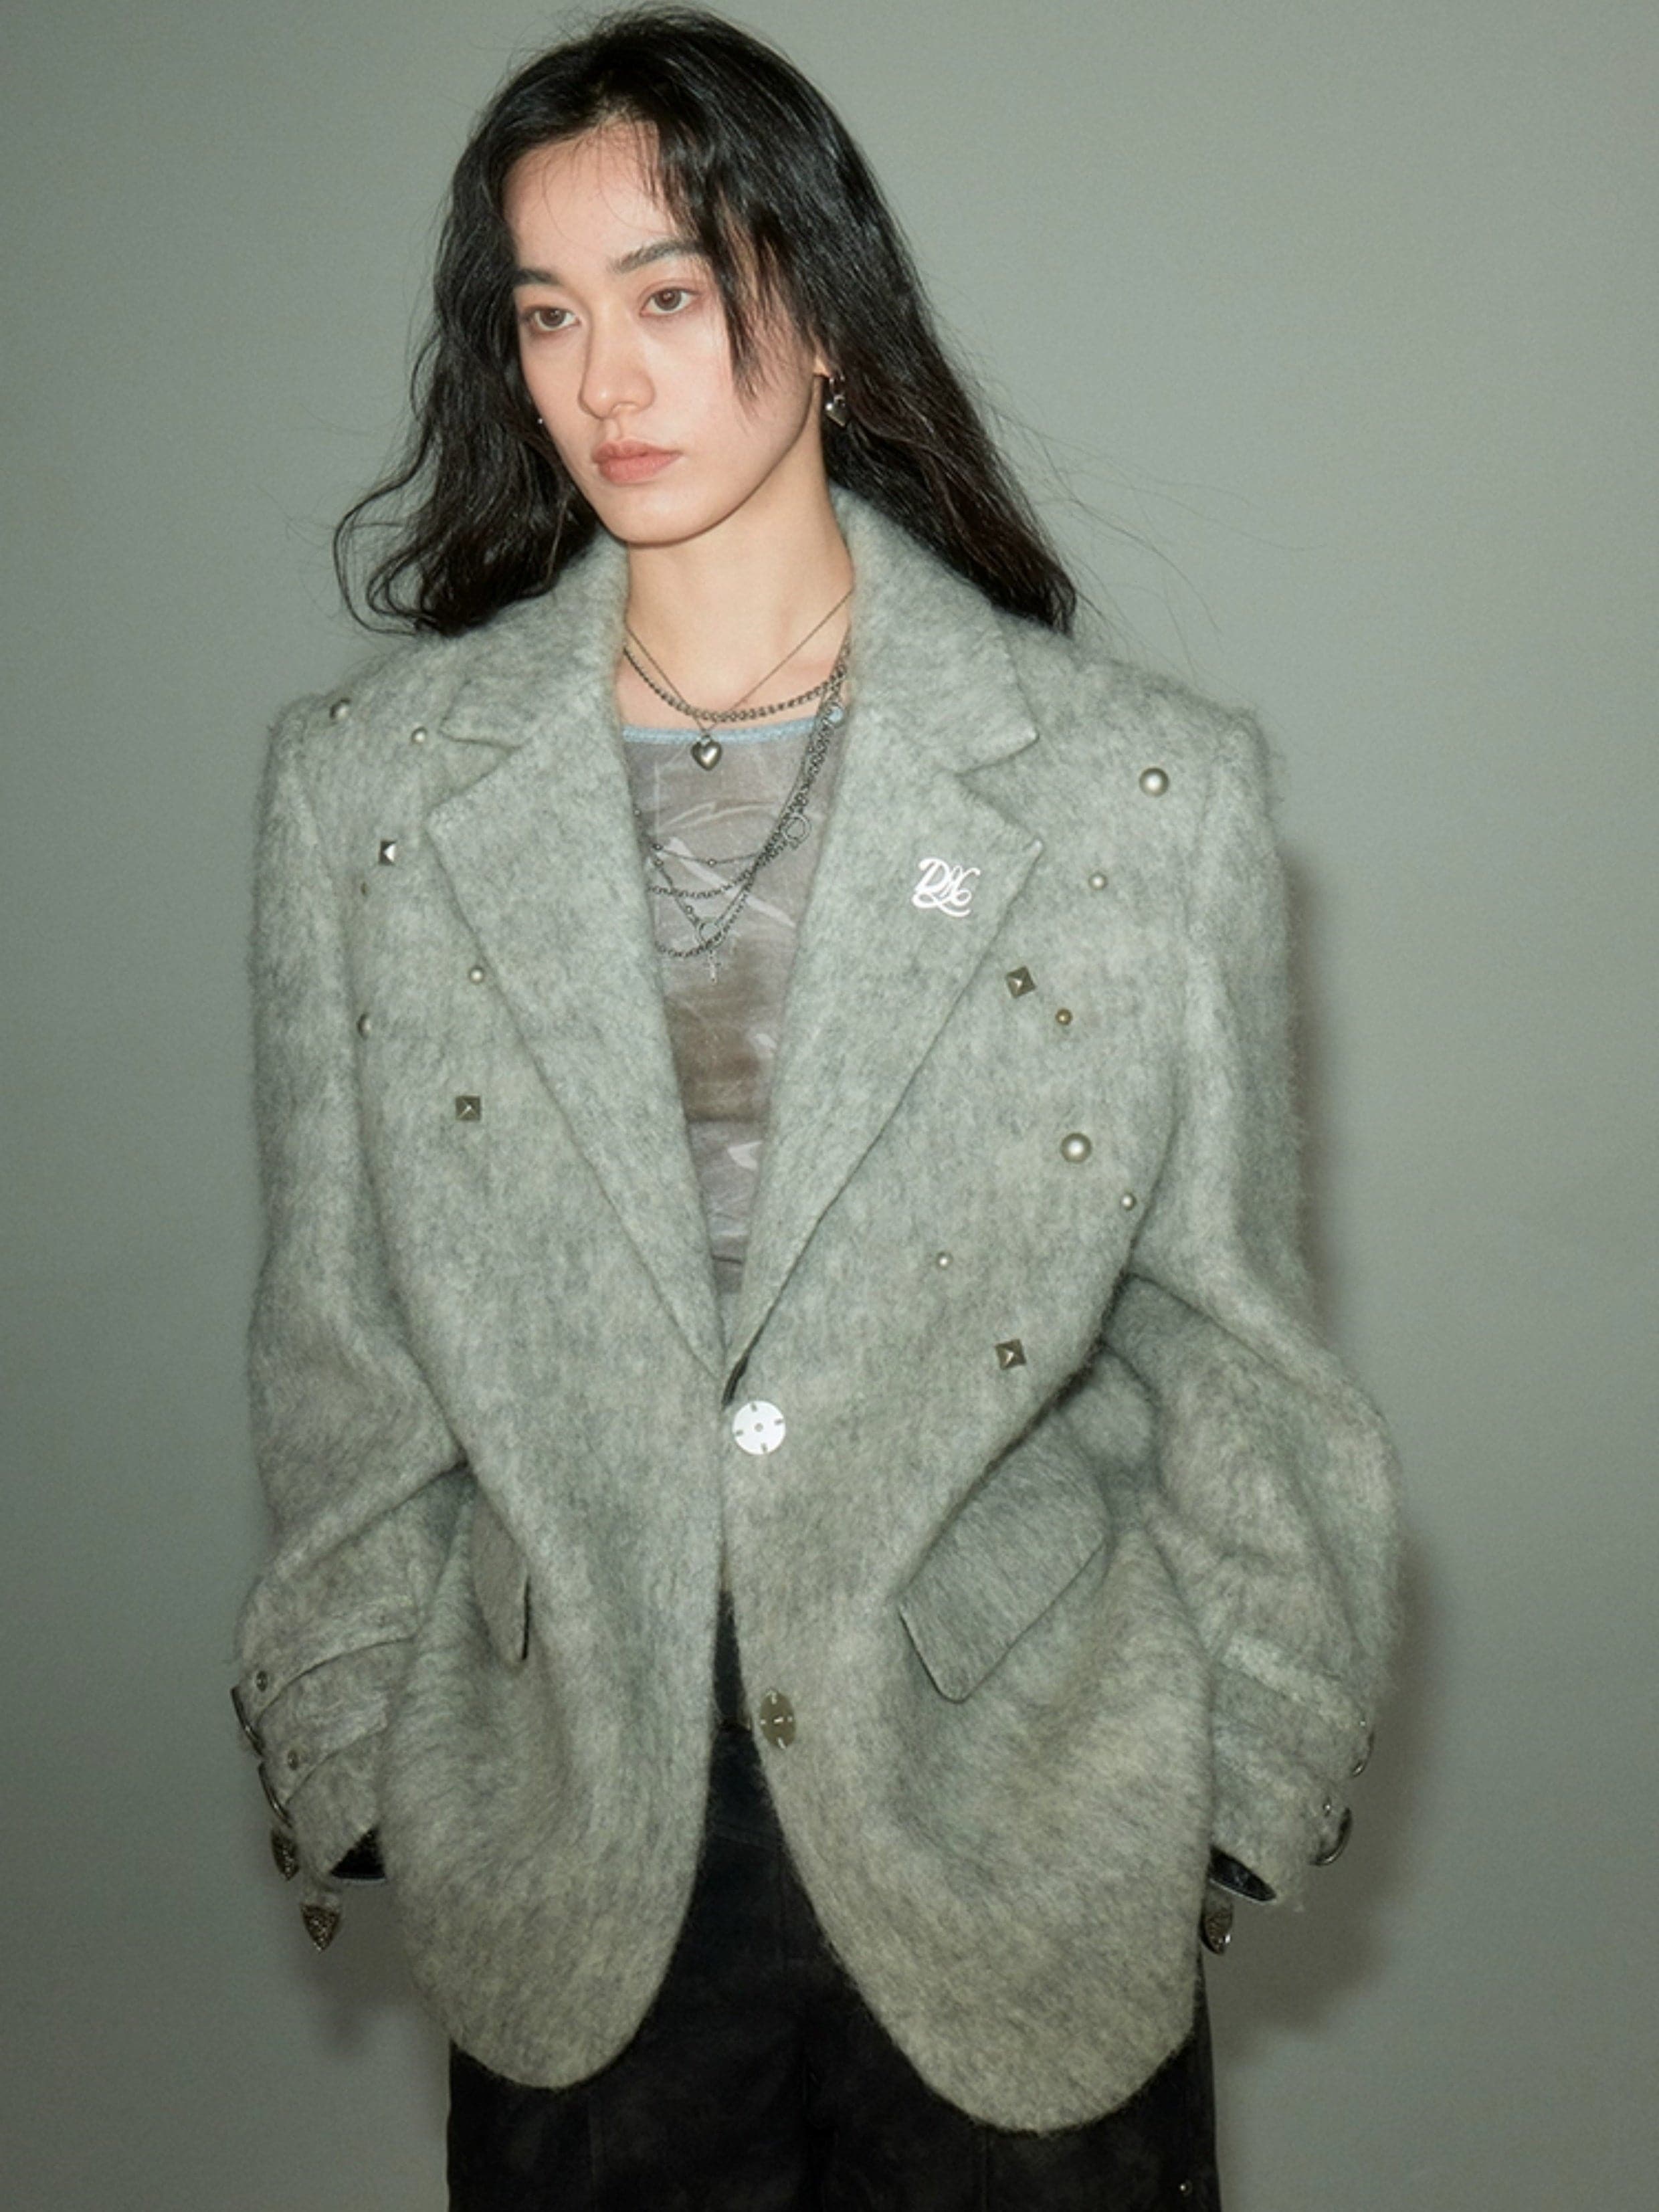 Chic Light Grey Wool-Blend Jacket With Statement Riveted Shoulder Pads